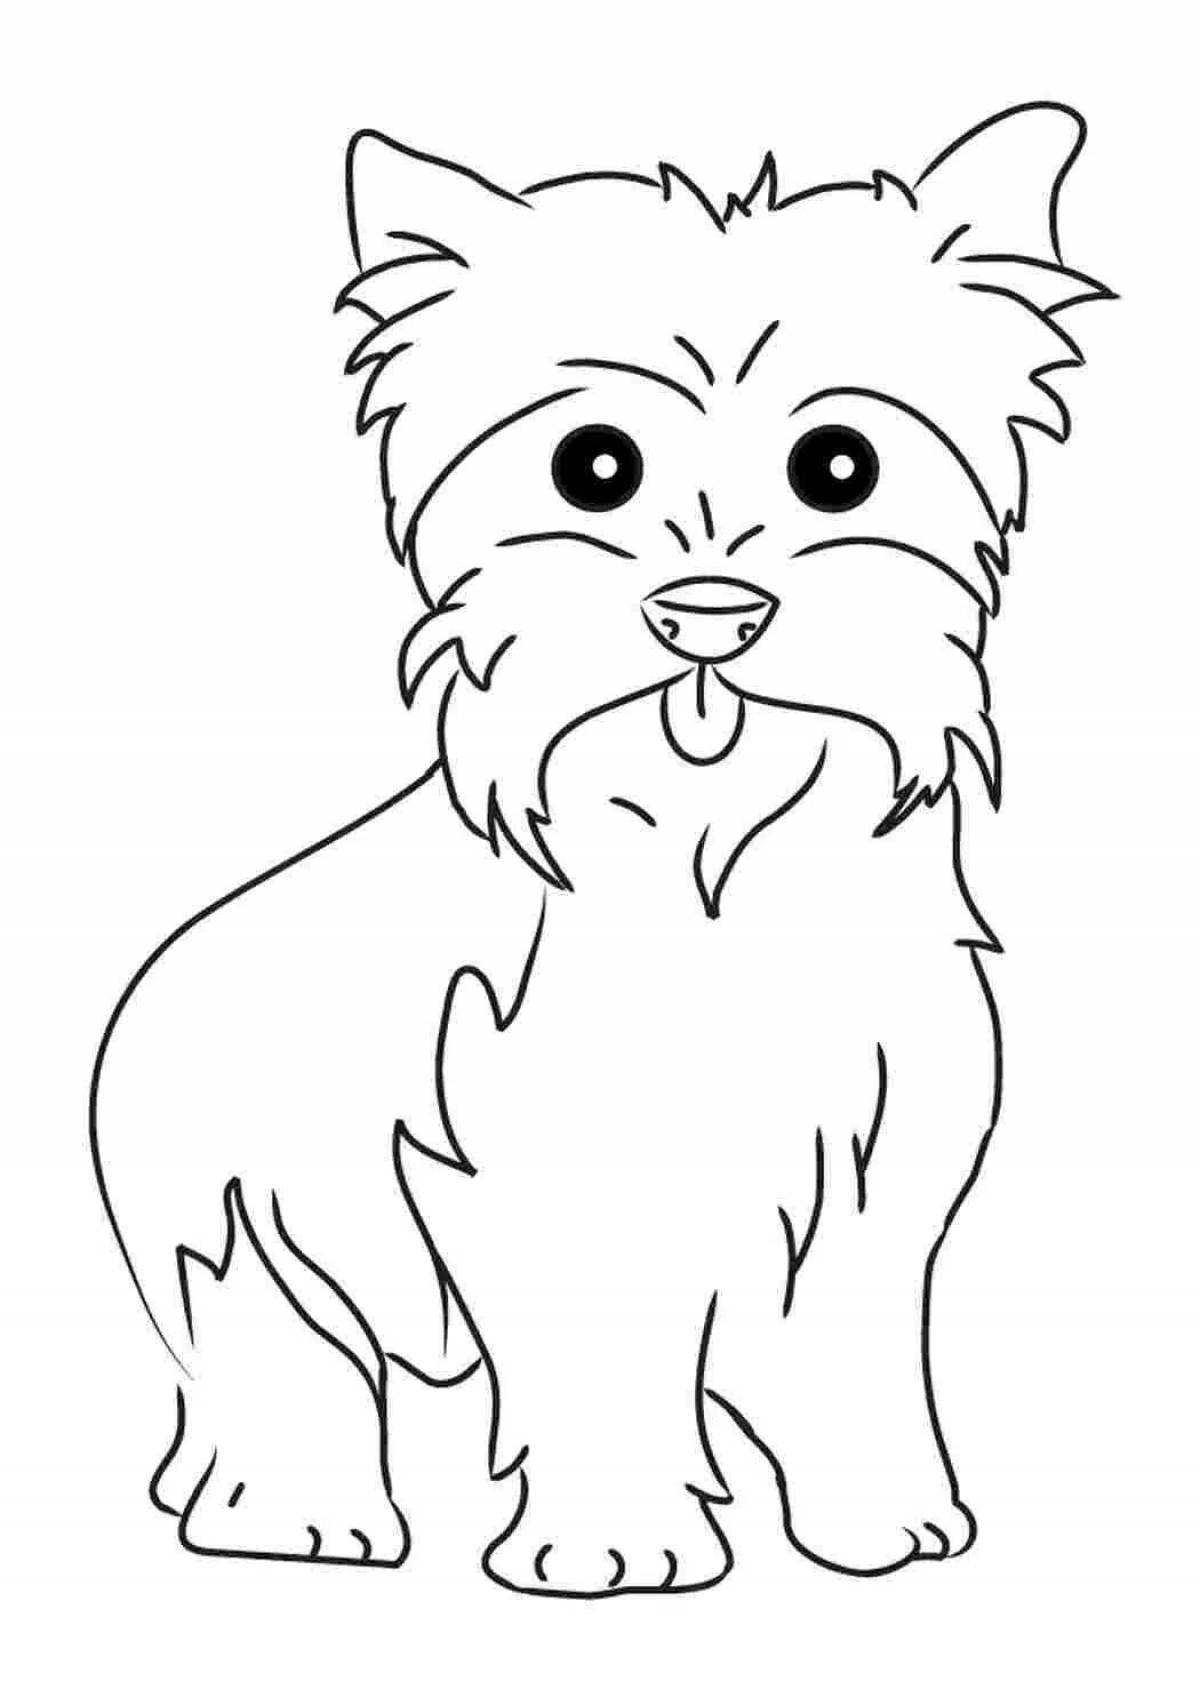 Colouring perky yorkshire terrier